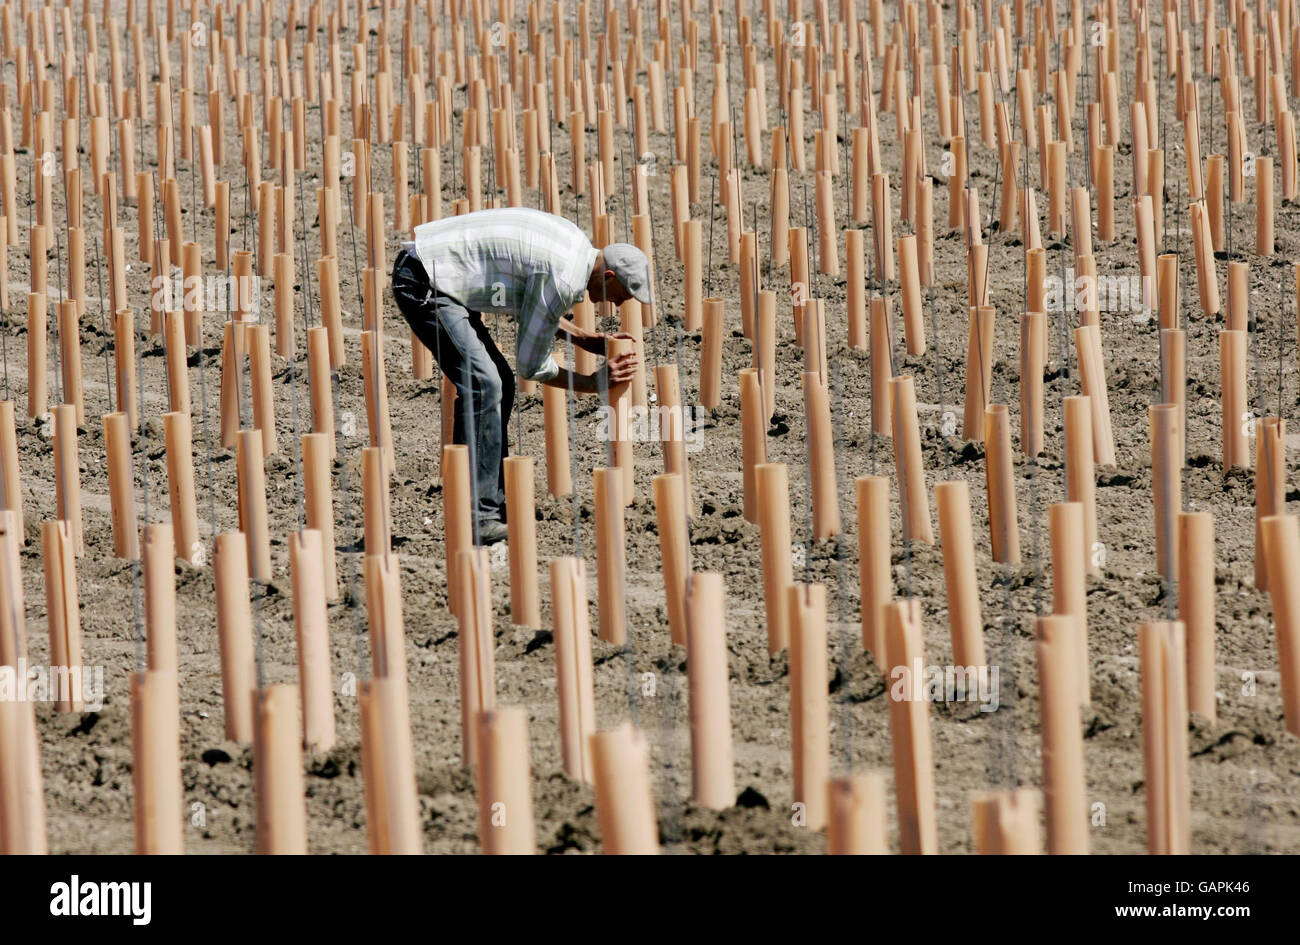 Craig Daly, Viticulturist and Vineyards Manager at Chapel Down Winery, tends to newly planted vines in a vineyard near Maidstone, Kent. Stock Photo